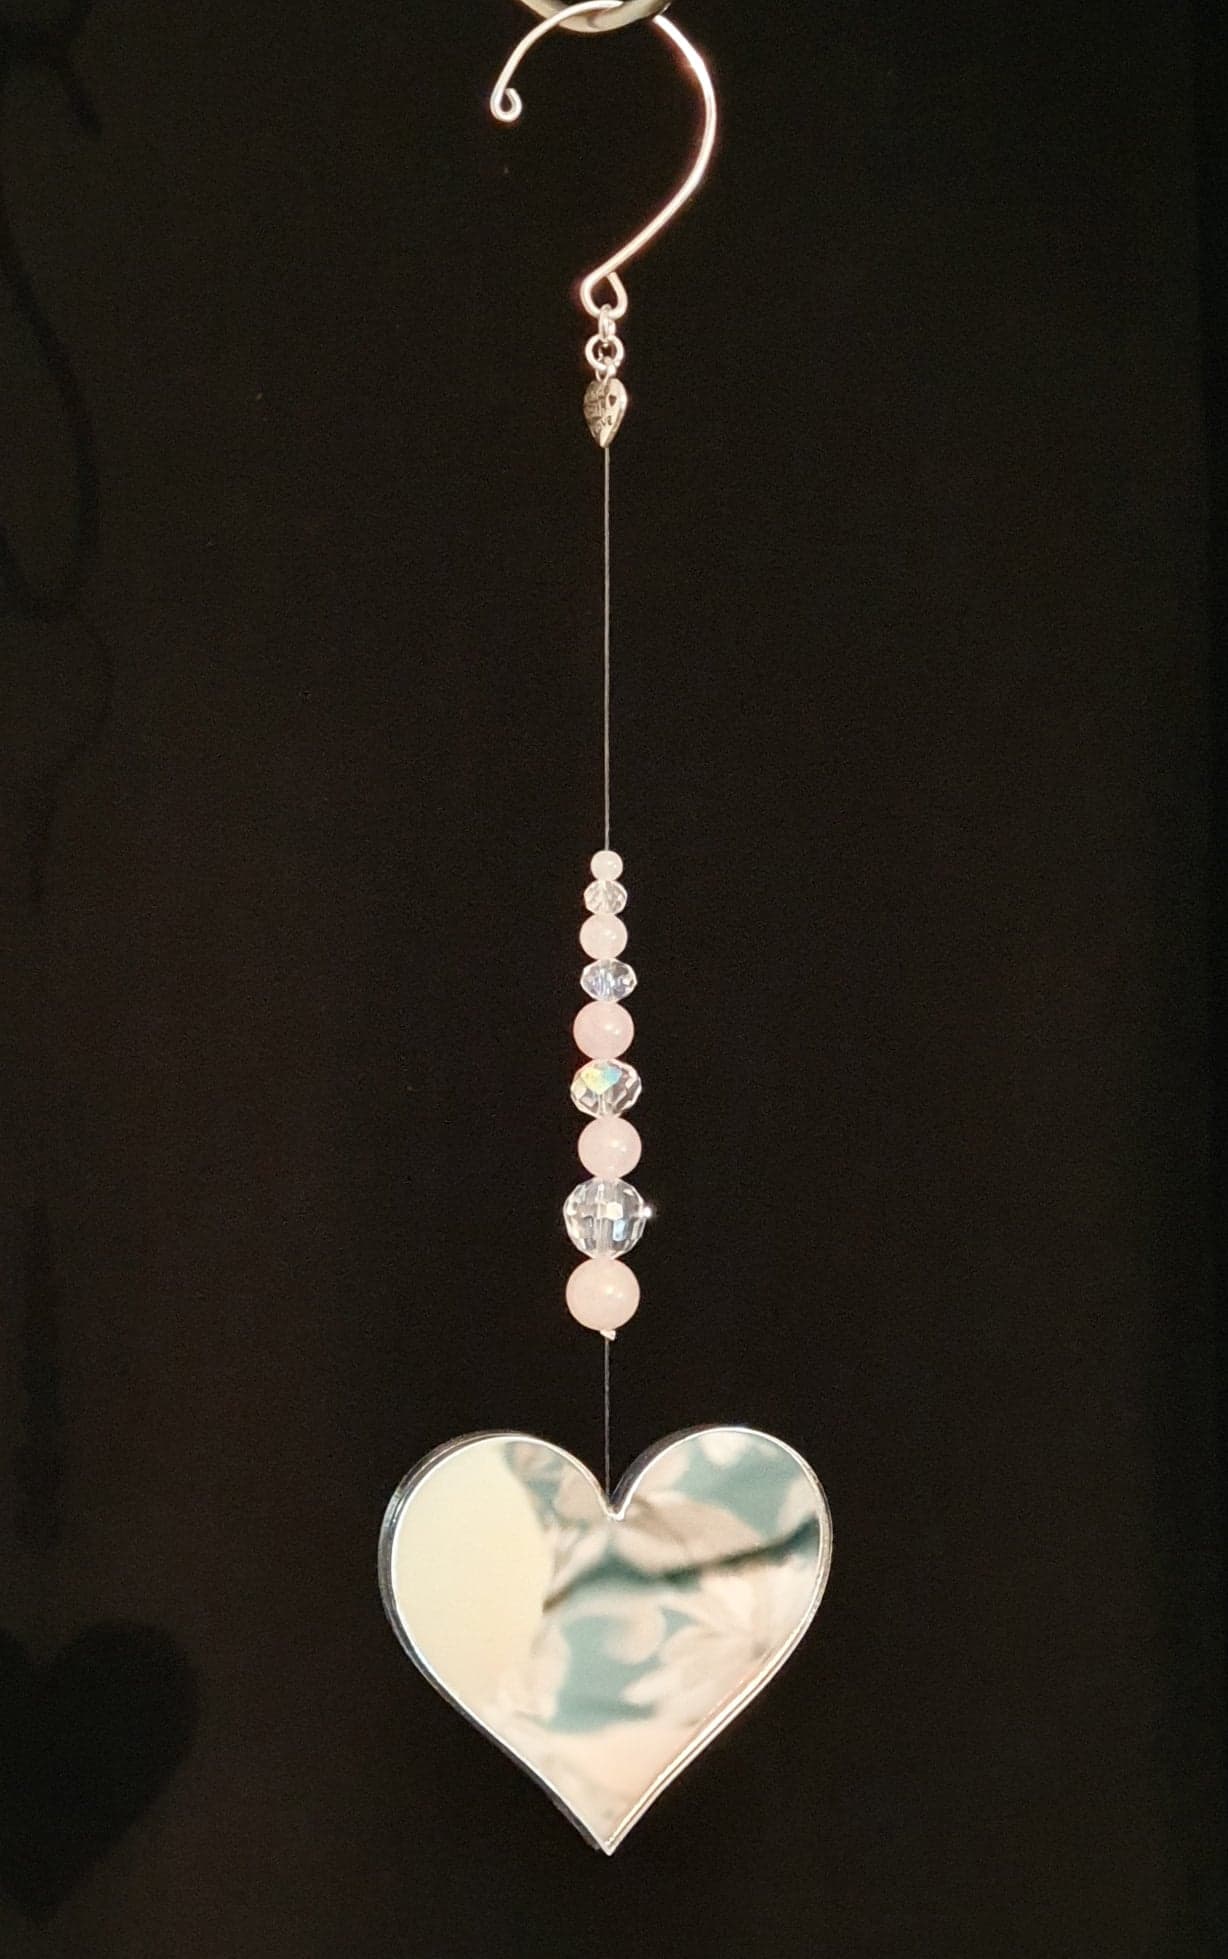 Mirror heart with Rose quartz and AB faceted crystals window decoration